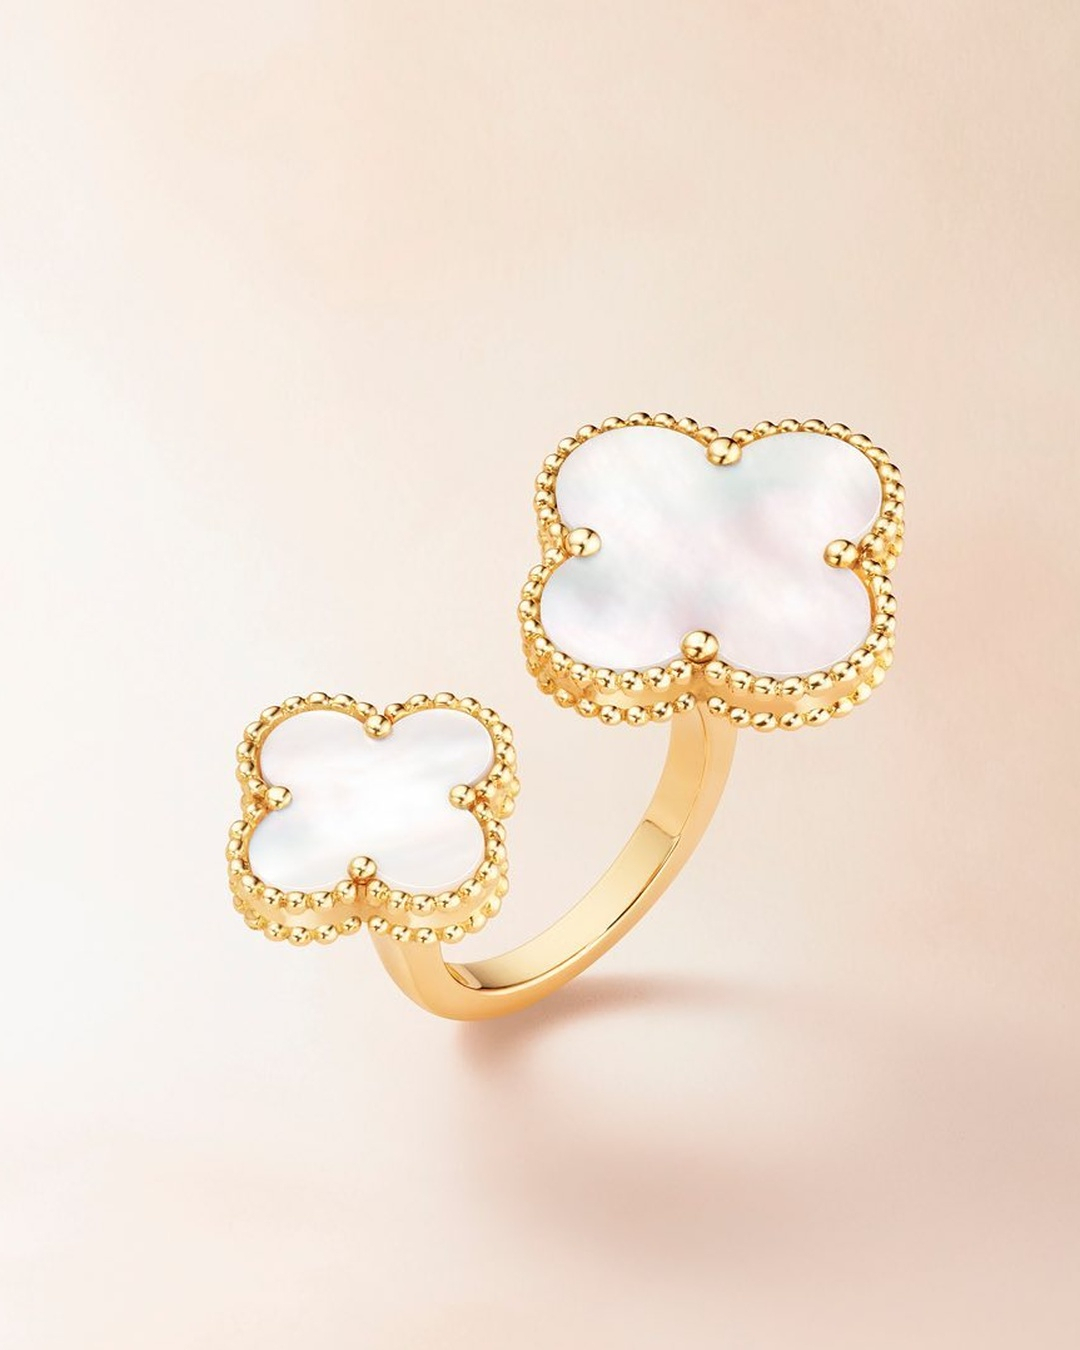 such an iconic must have piece: Van Cleef & Arpels Vintage